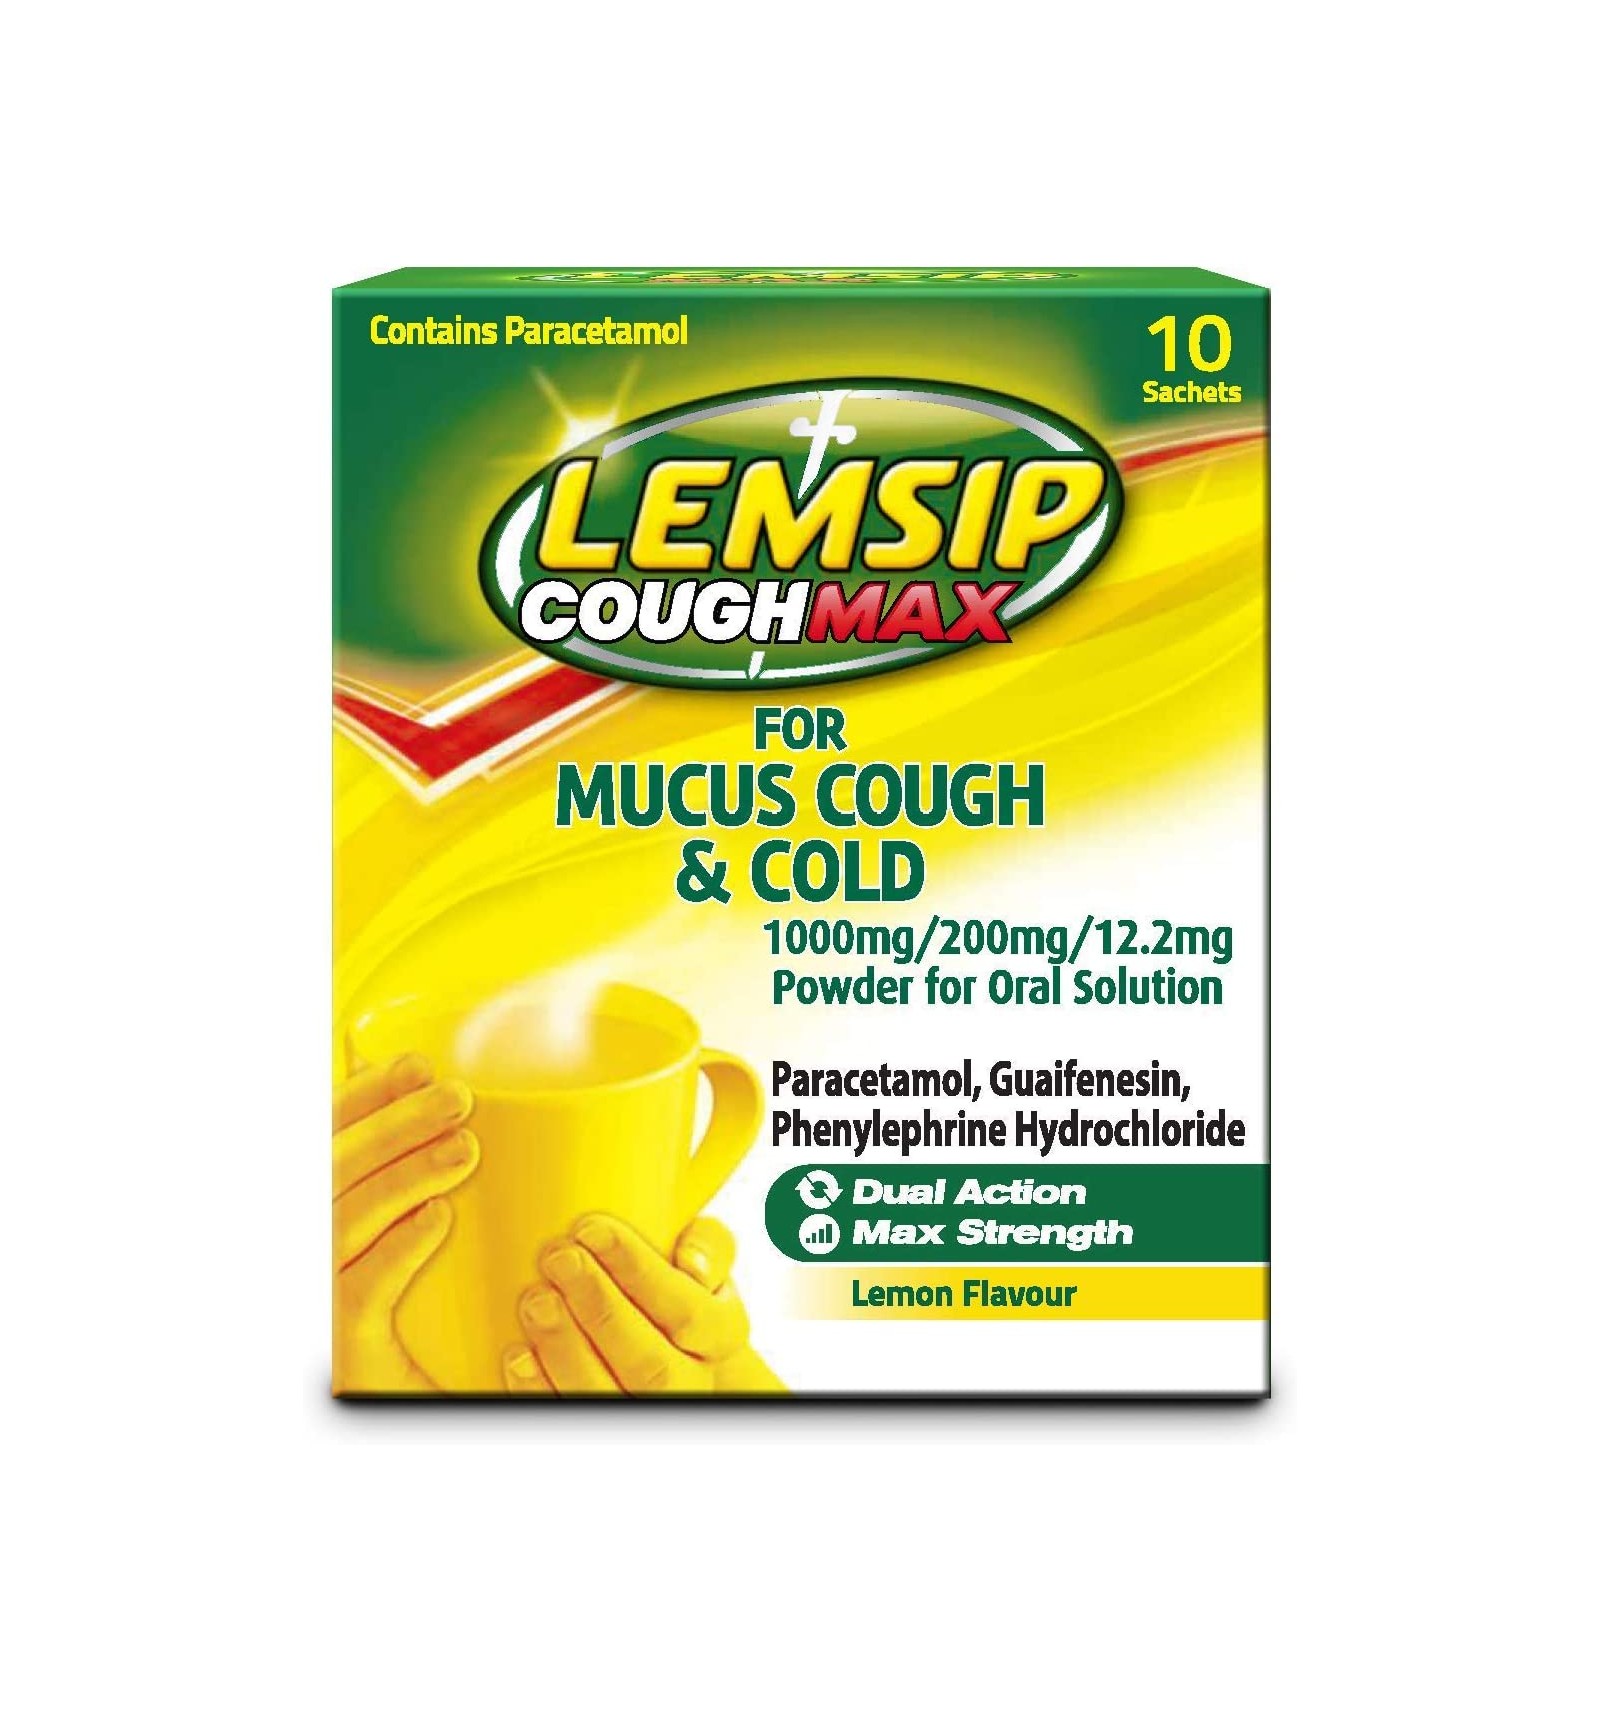 Lemsip Cough Max for Mucus Cough 10 Sachets